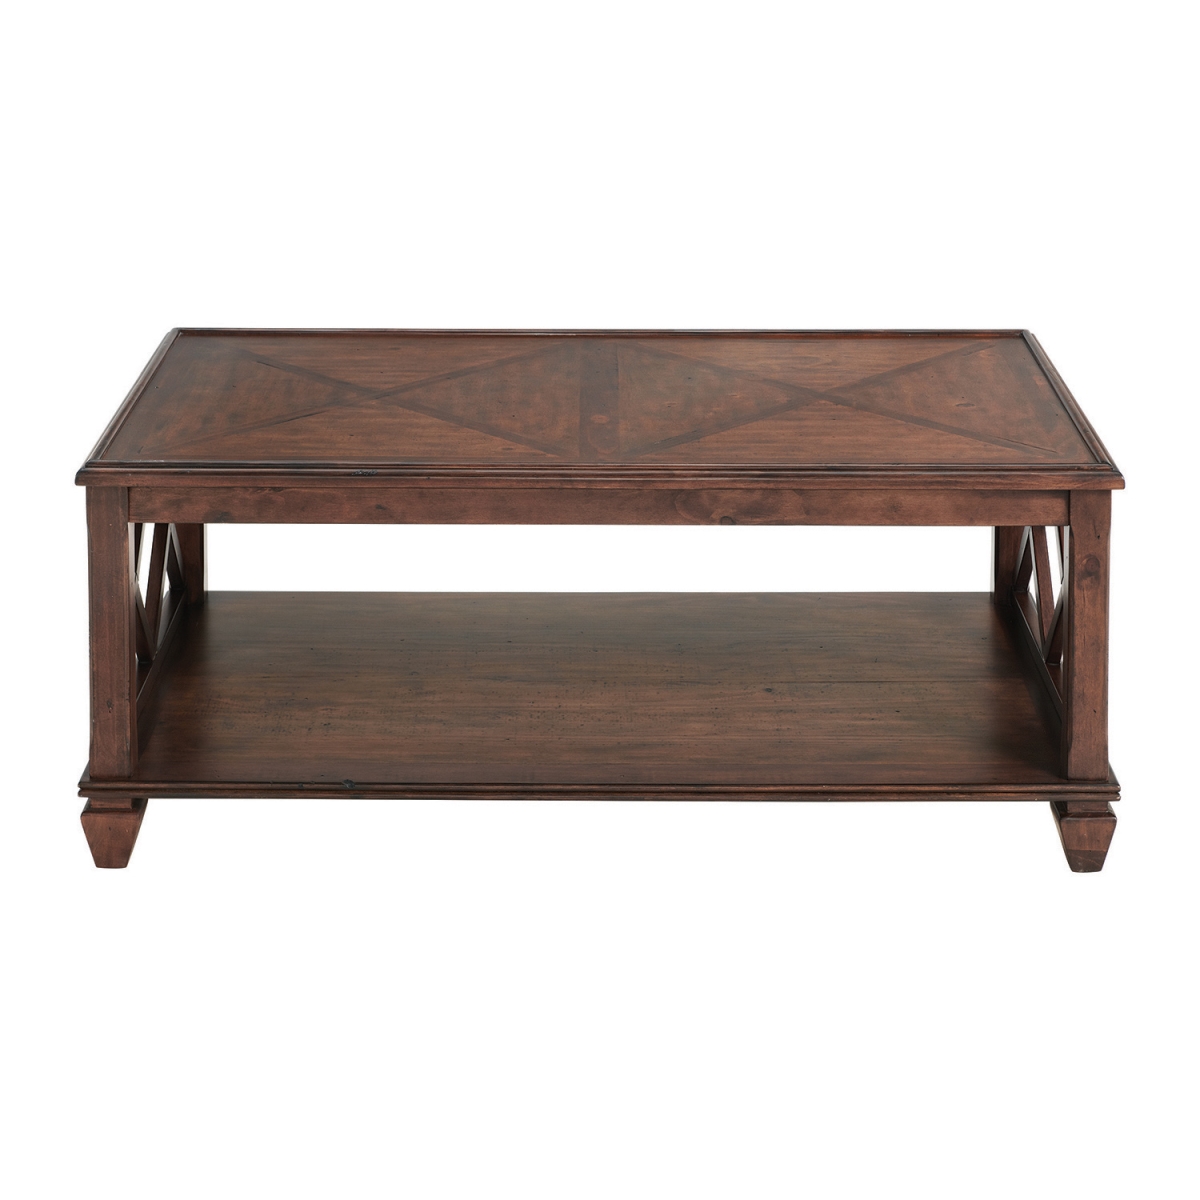 Picture of Alaterre ANSB1162 45 in. Stockbridge Wood Coffee Table